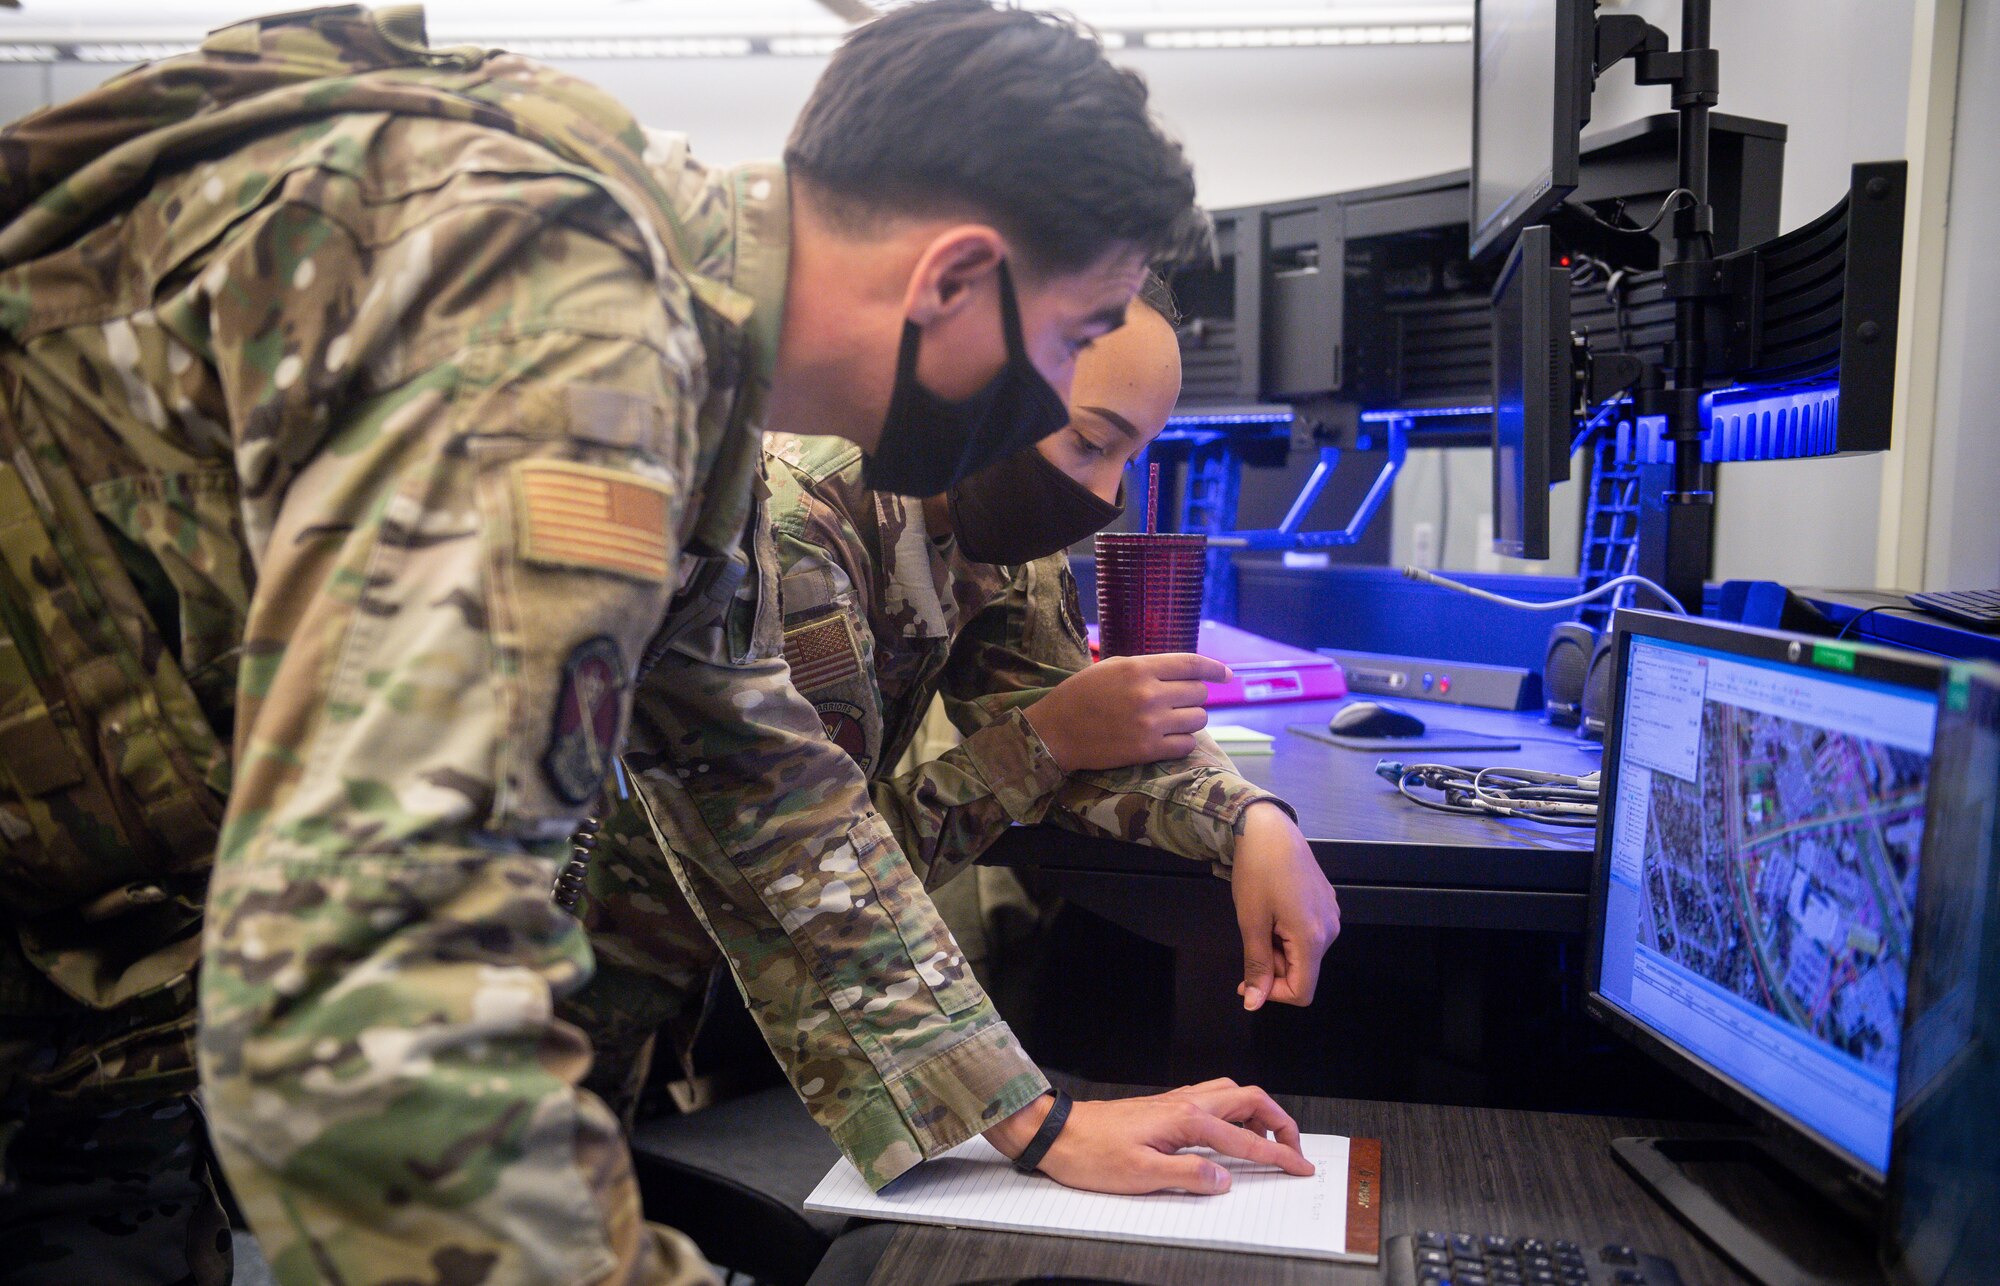 Staff Sgt. Robert Bieber, 2nd Security Forces base dispatch operator, and Staff Sgt. Brianne Davis-Robertson, 2nd SFS evaluator, pinpoint coordinates of a crash site at Barksdale Air Force Base, La., Dec. 16, 2020. Airmen from the 2nd SFS, 2nd Civil Engineer Squadron, 2nd Medical Group, 2nd Logistics Readiness Squadron and local authorities worked in conjunction to locate and effectively respond to a civilian light aircraft crash on the east side of Barksdale. (U.S. Air Force photo by Senior Airman Lillian Miller)